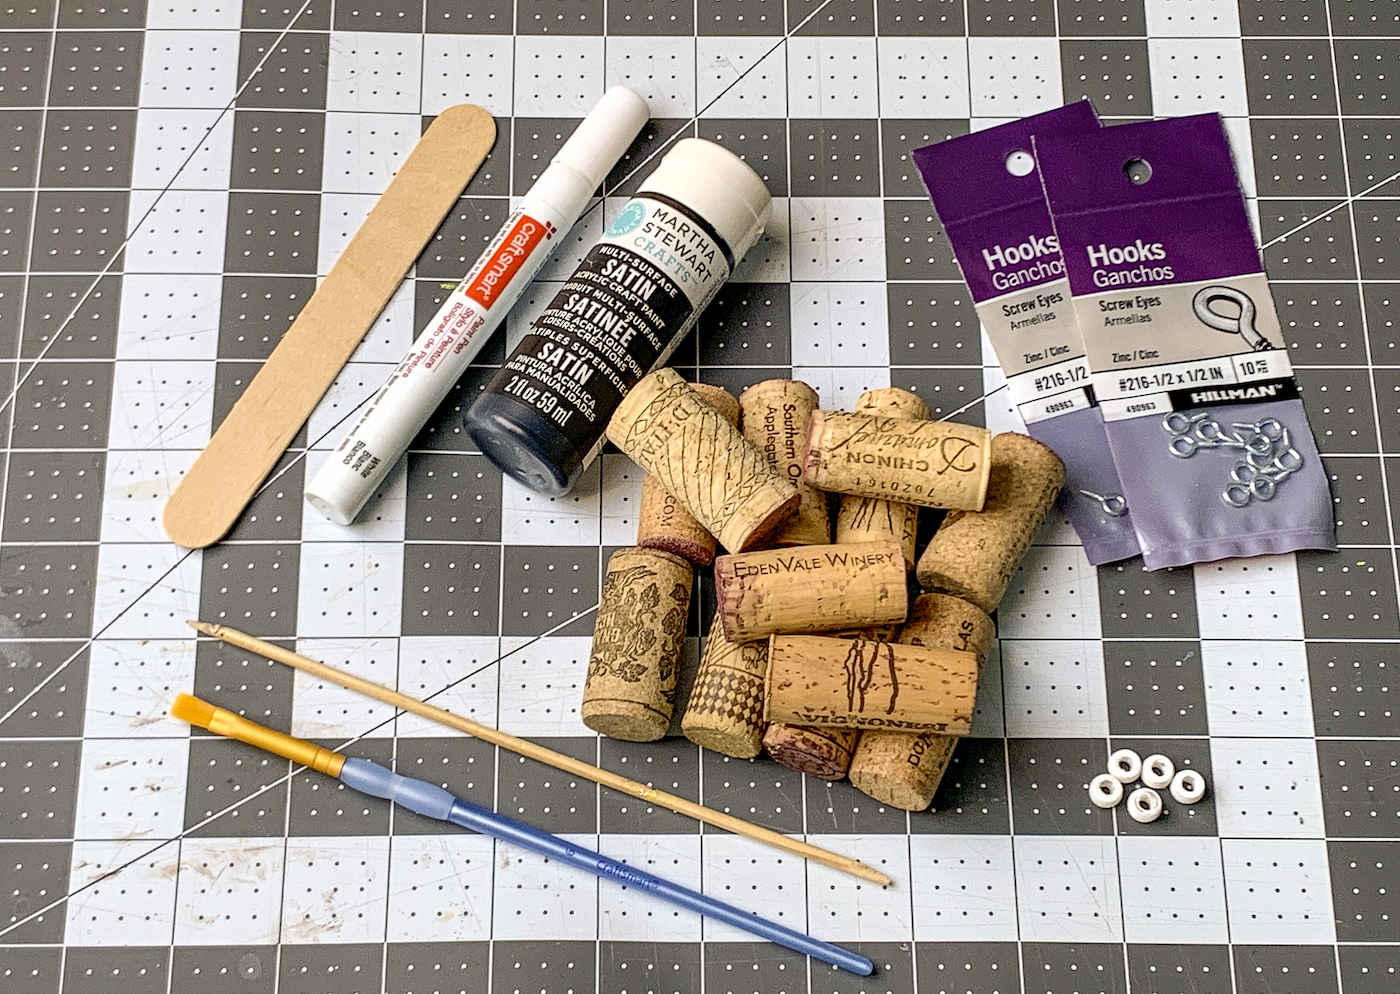 Wine corks, black paint, white paint pen, popsicle stick, paintbrushes, beads, and eye screws